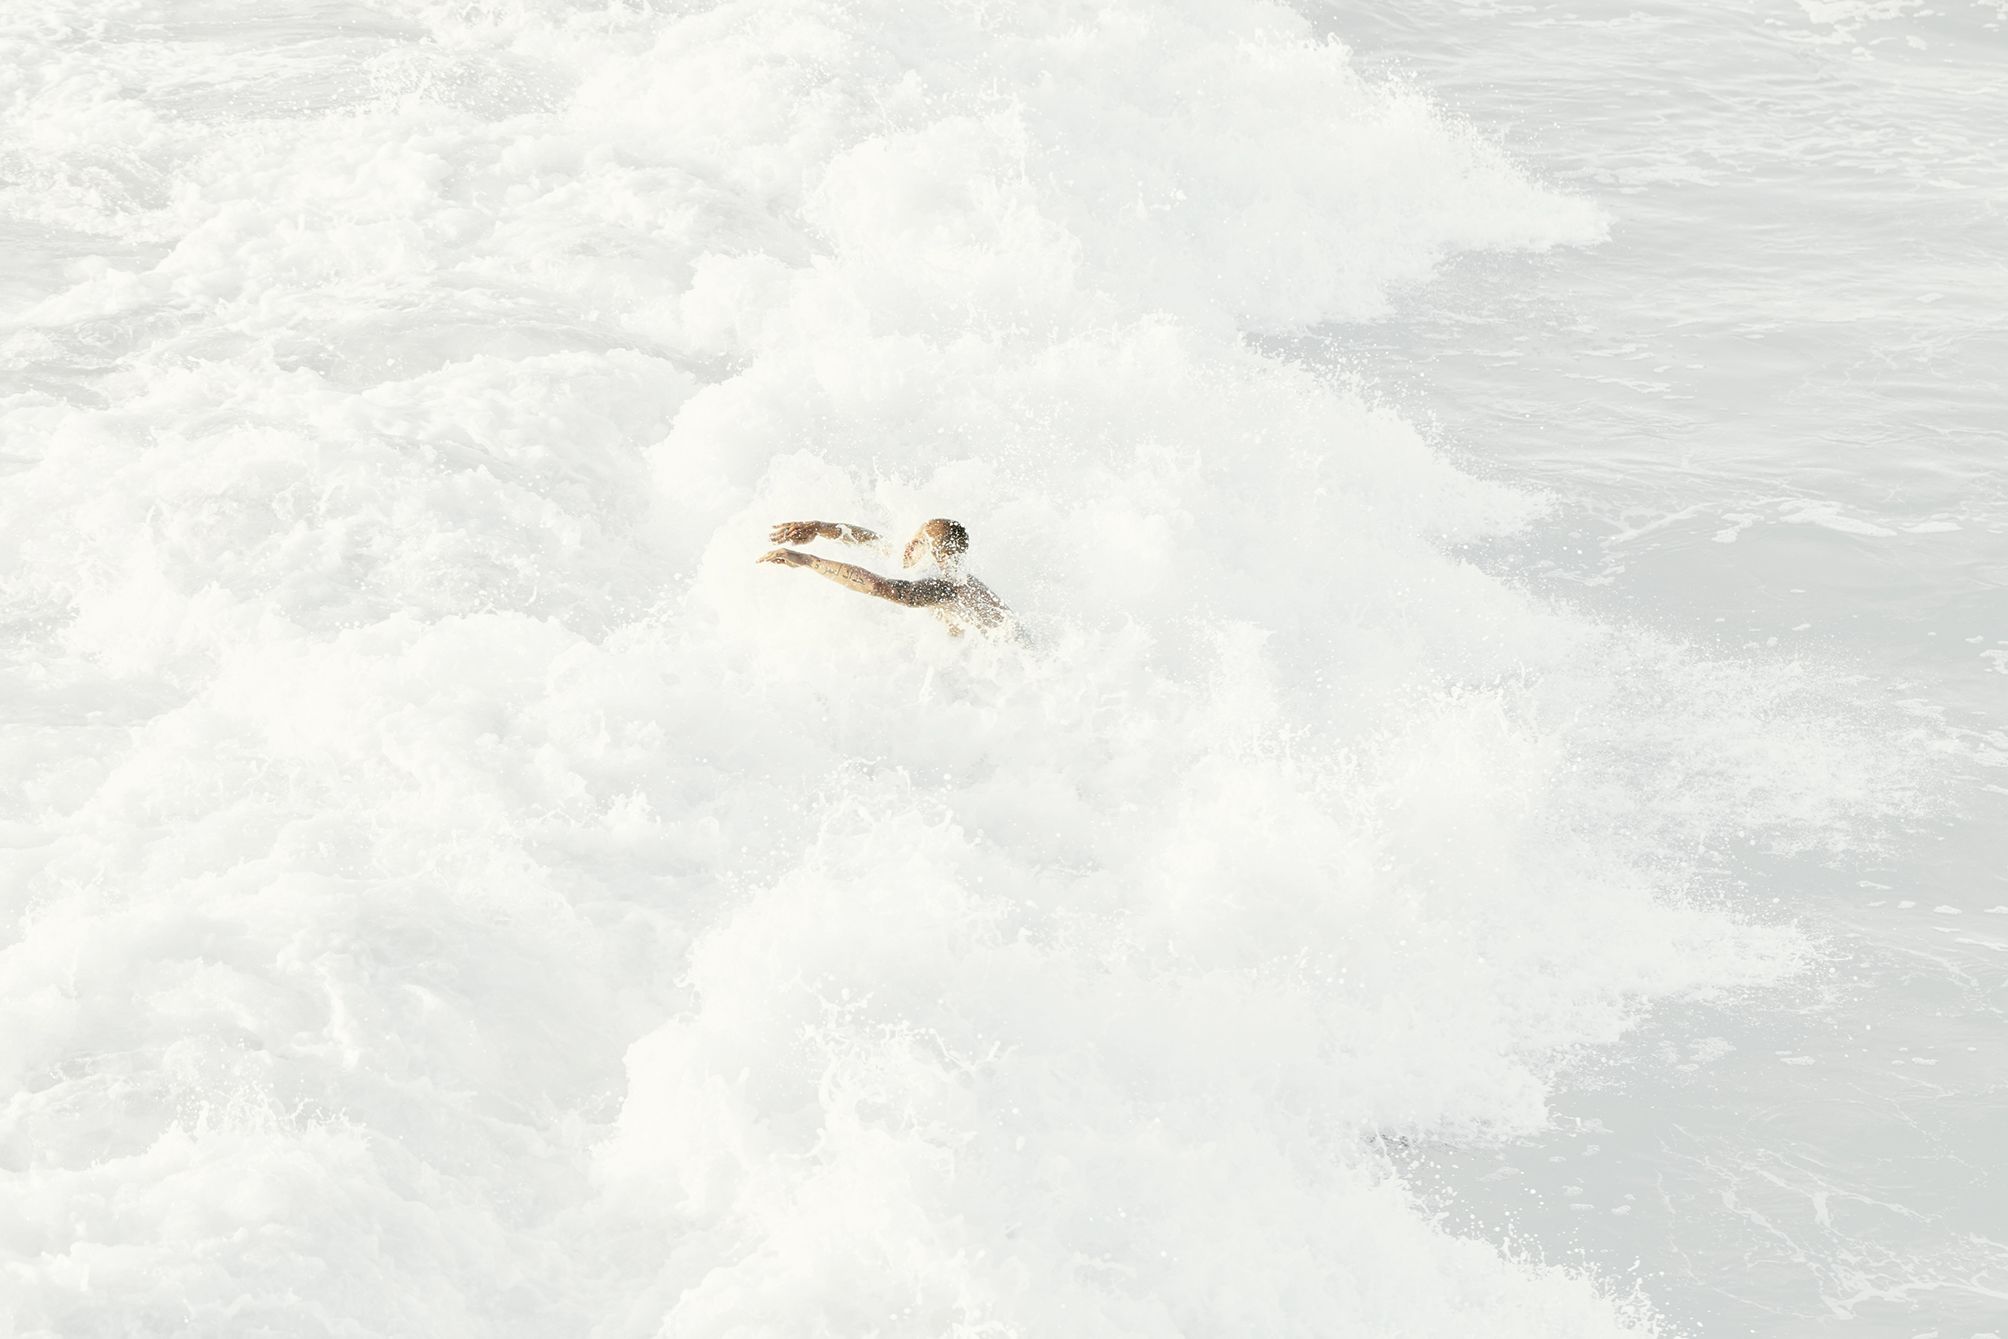 Man diving into the white wash of a wave in california.